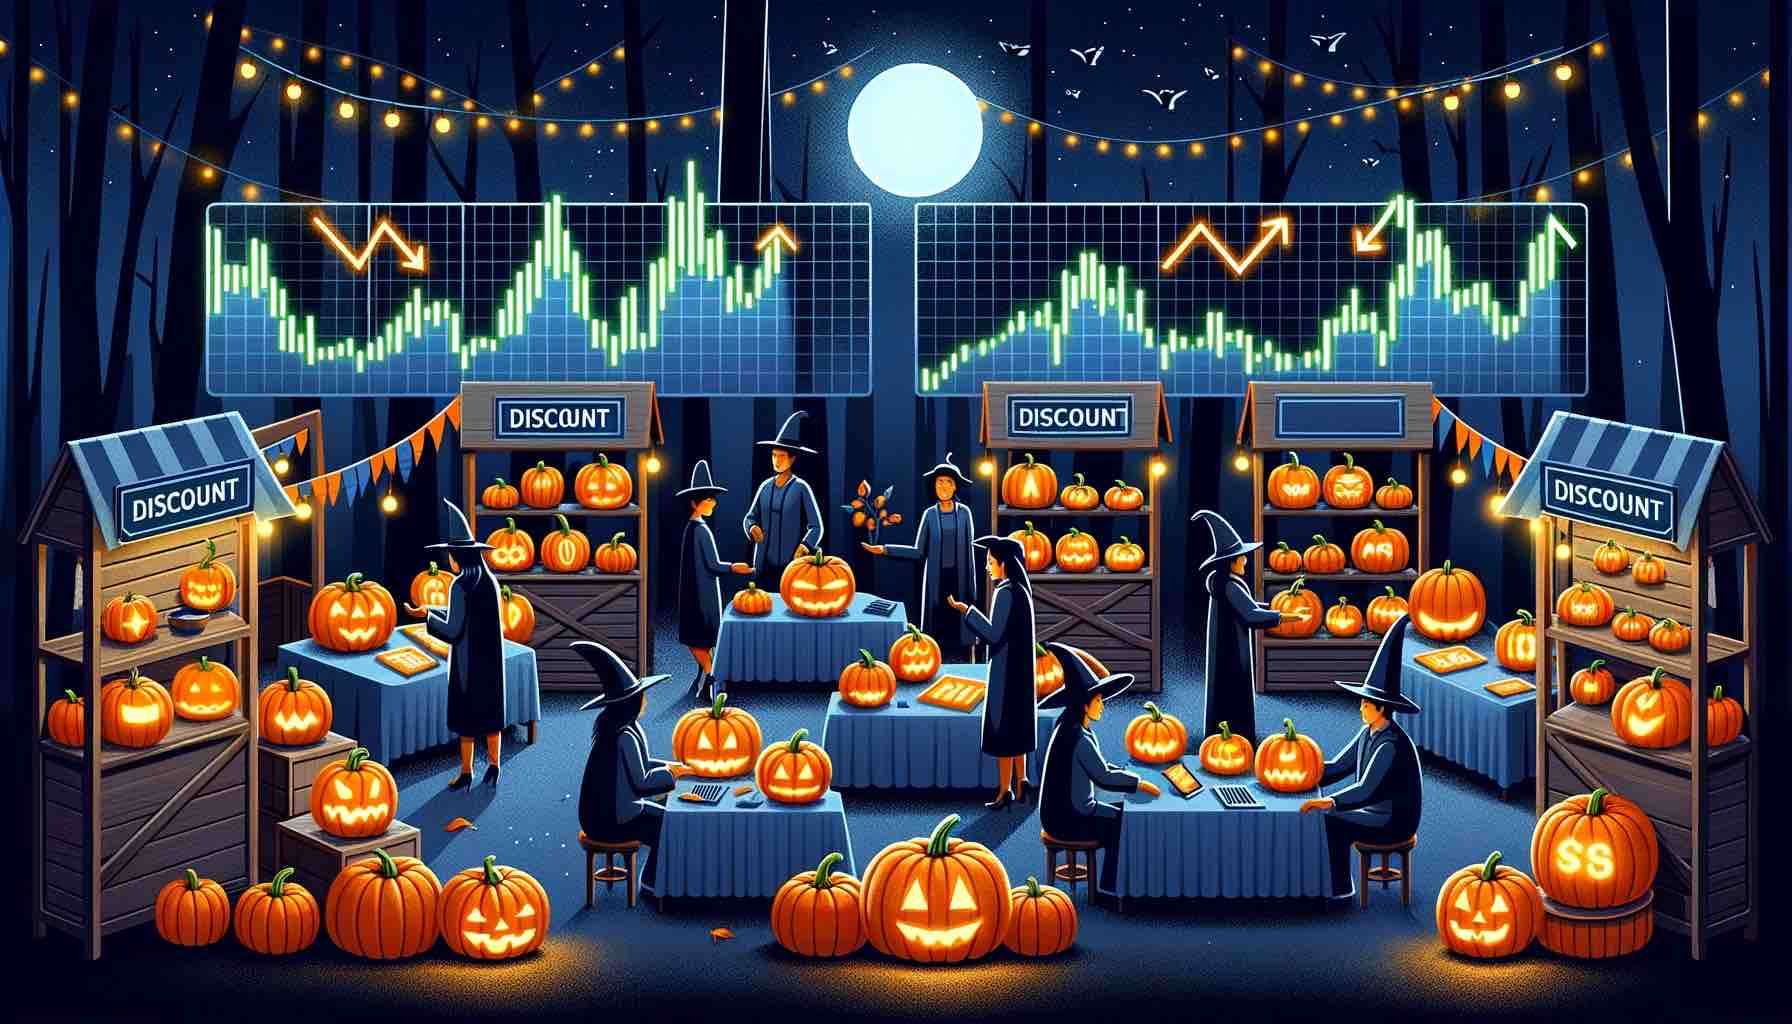 Jesse Version "0.43.3": Bybit API Upgrades 🛠️, DYDX Fixes 📈, Halloween "Spooky" Discount 🎃, and More